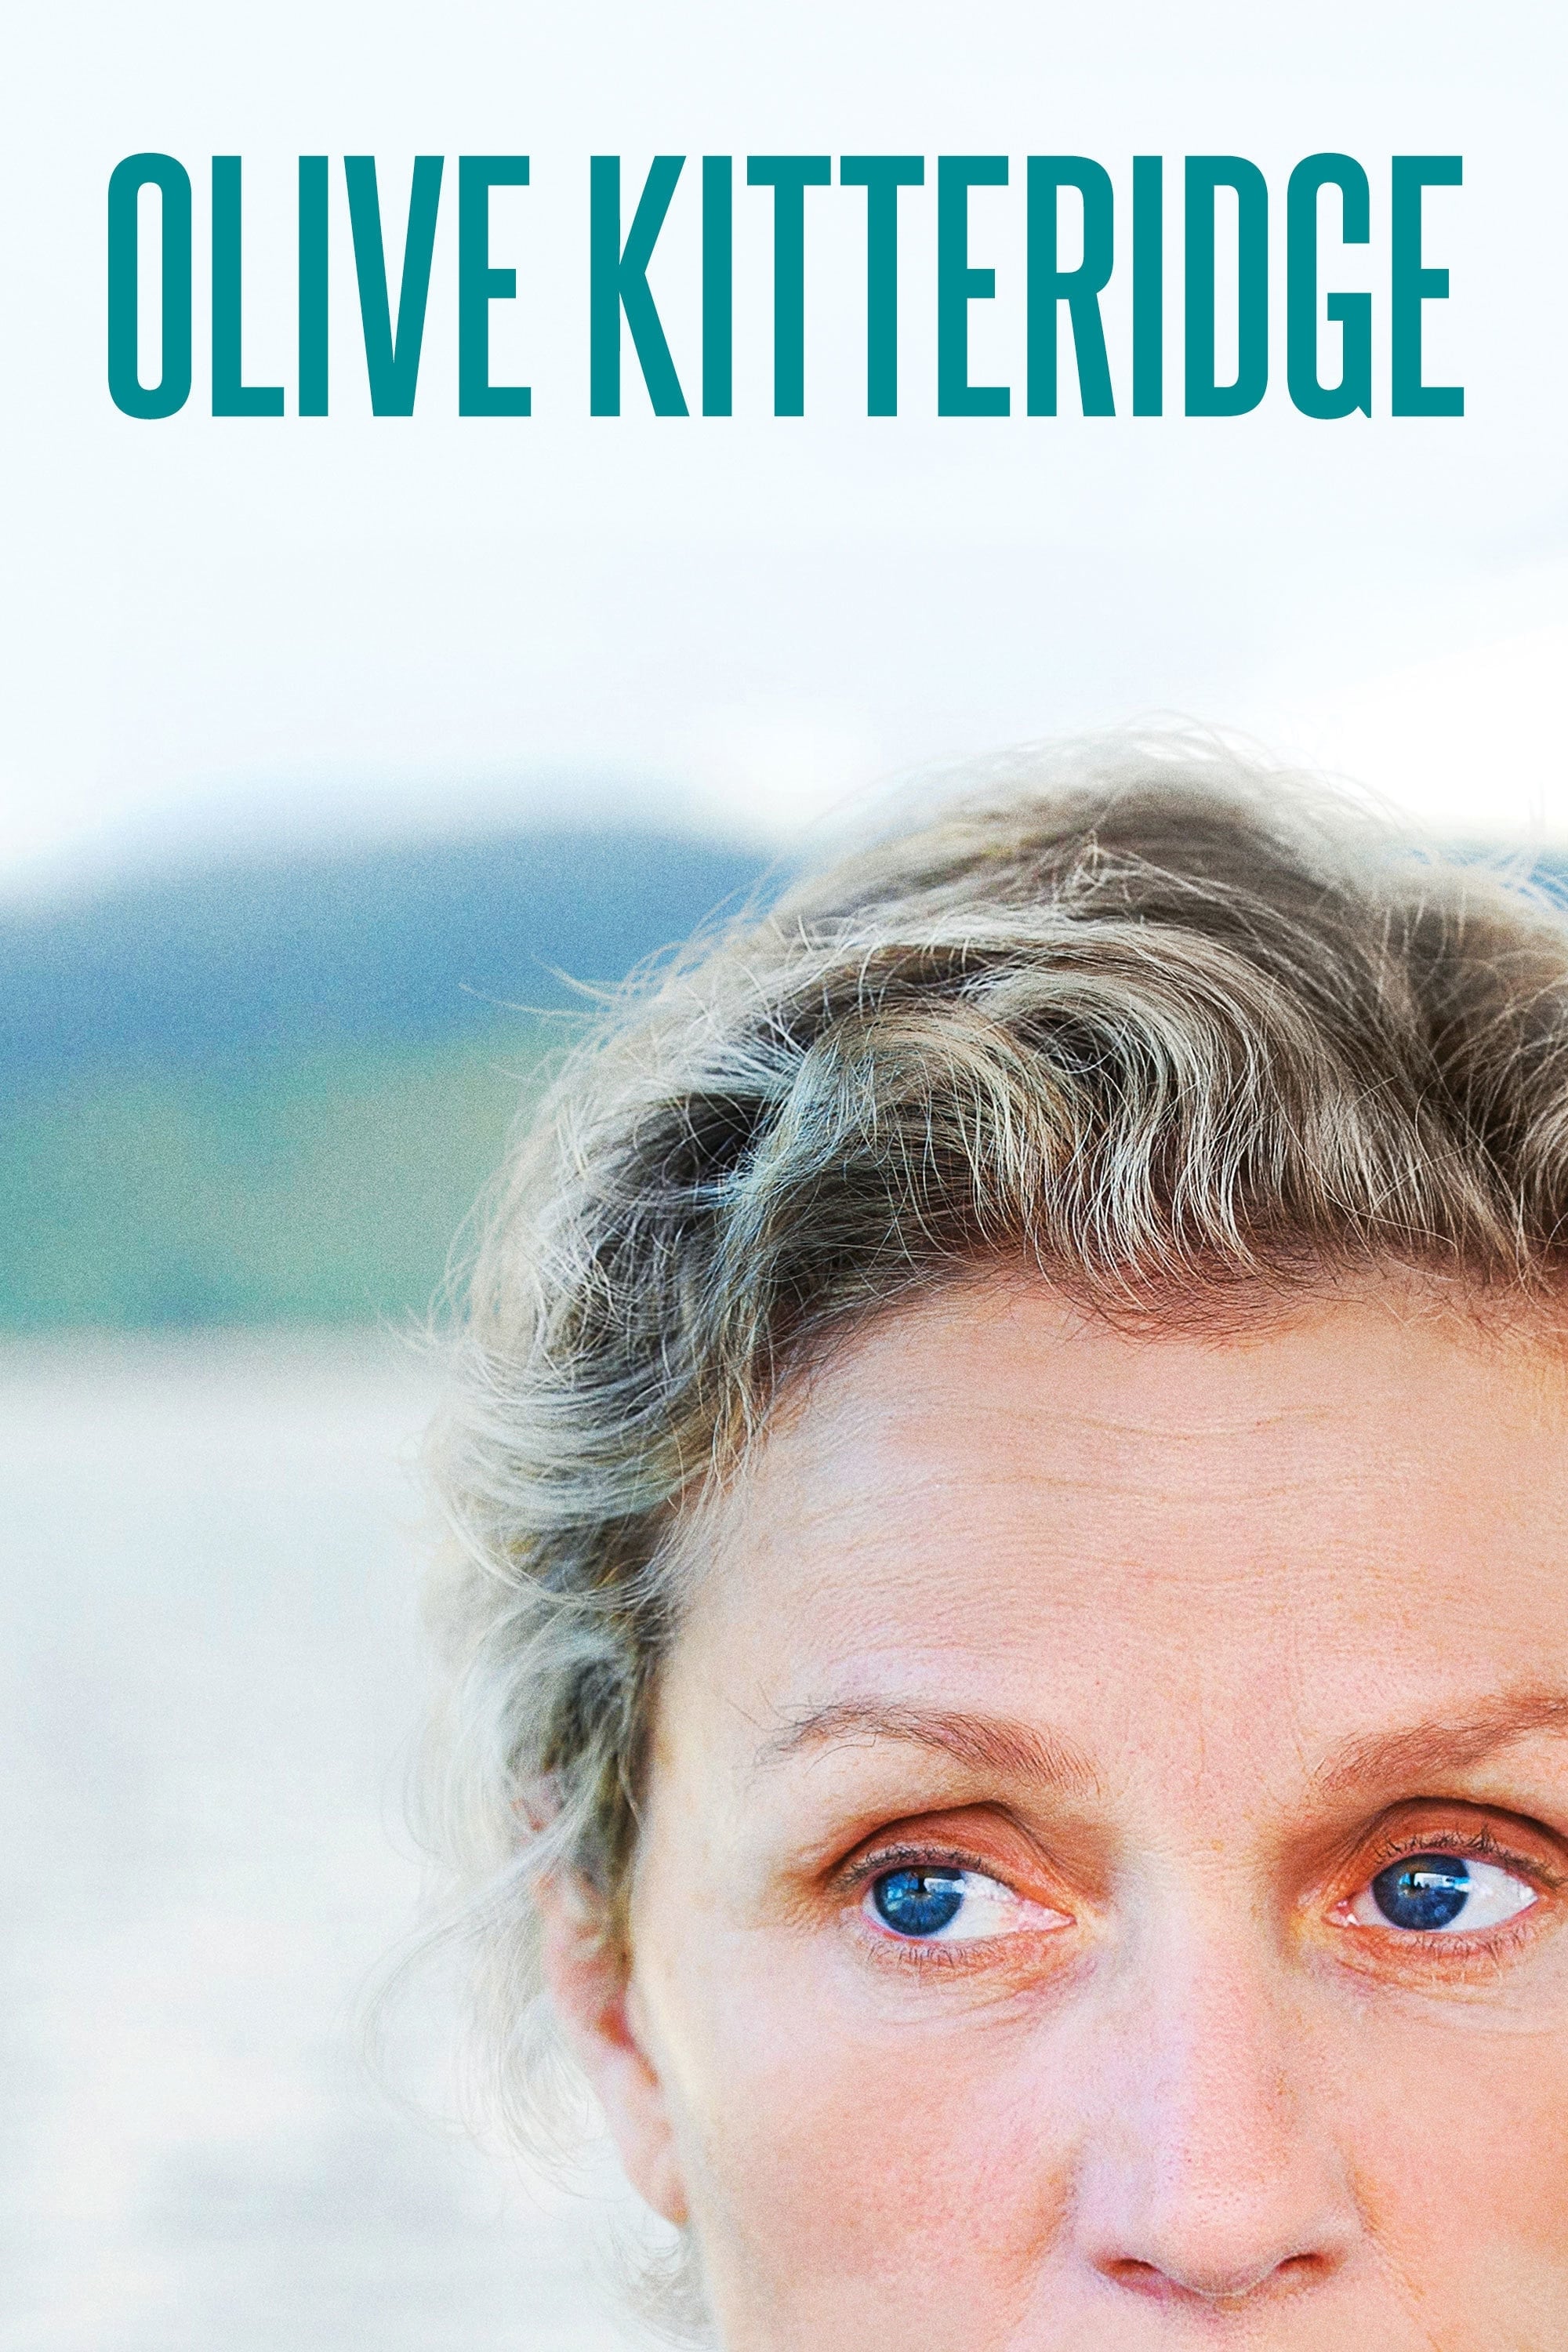 Olive Kitteridge TV Shows About Director